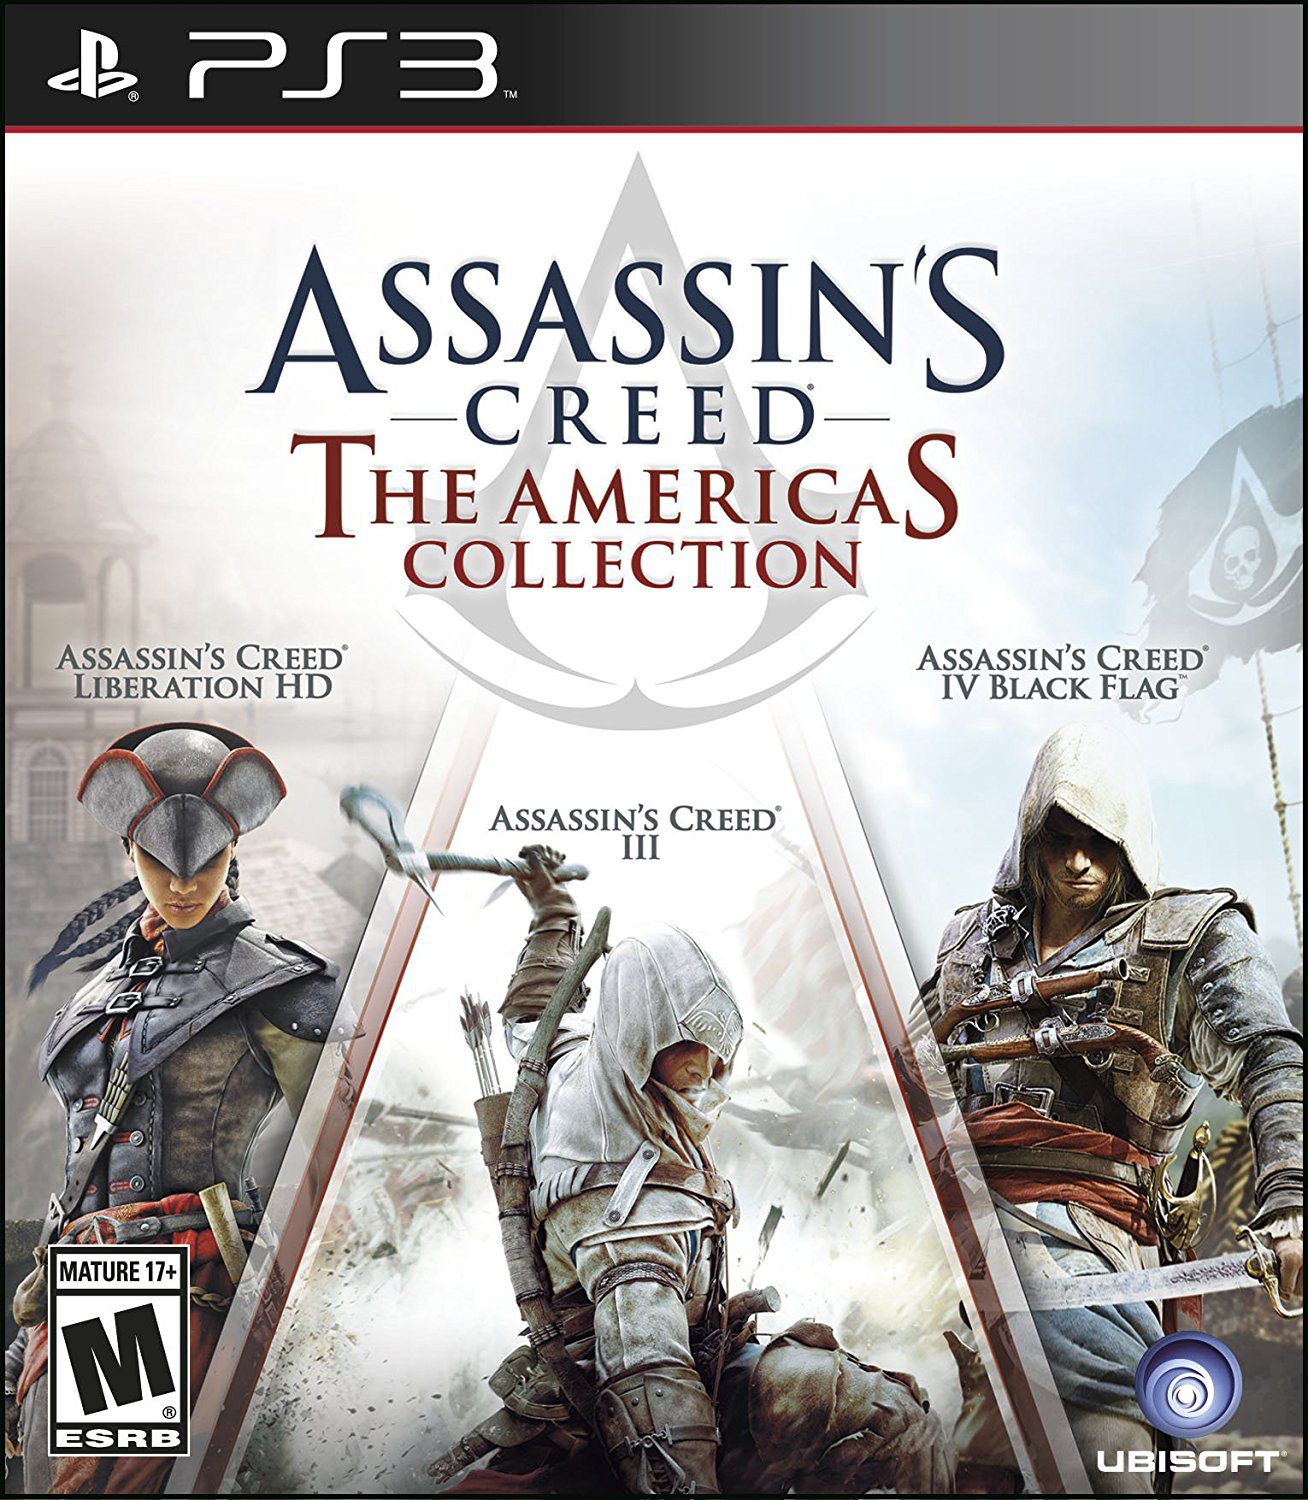 Assassins Creed's Collection